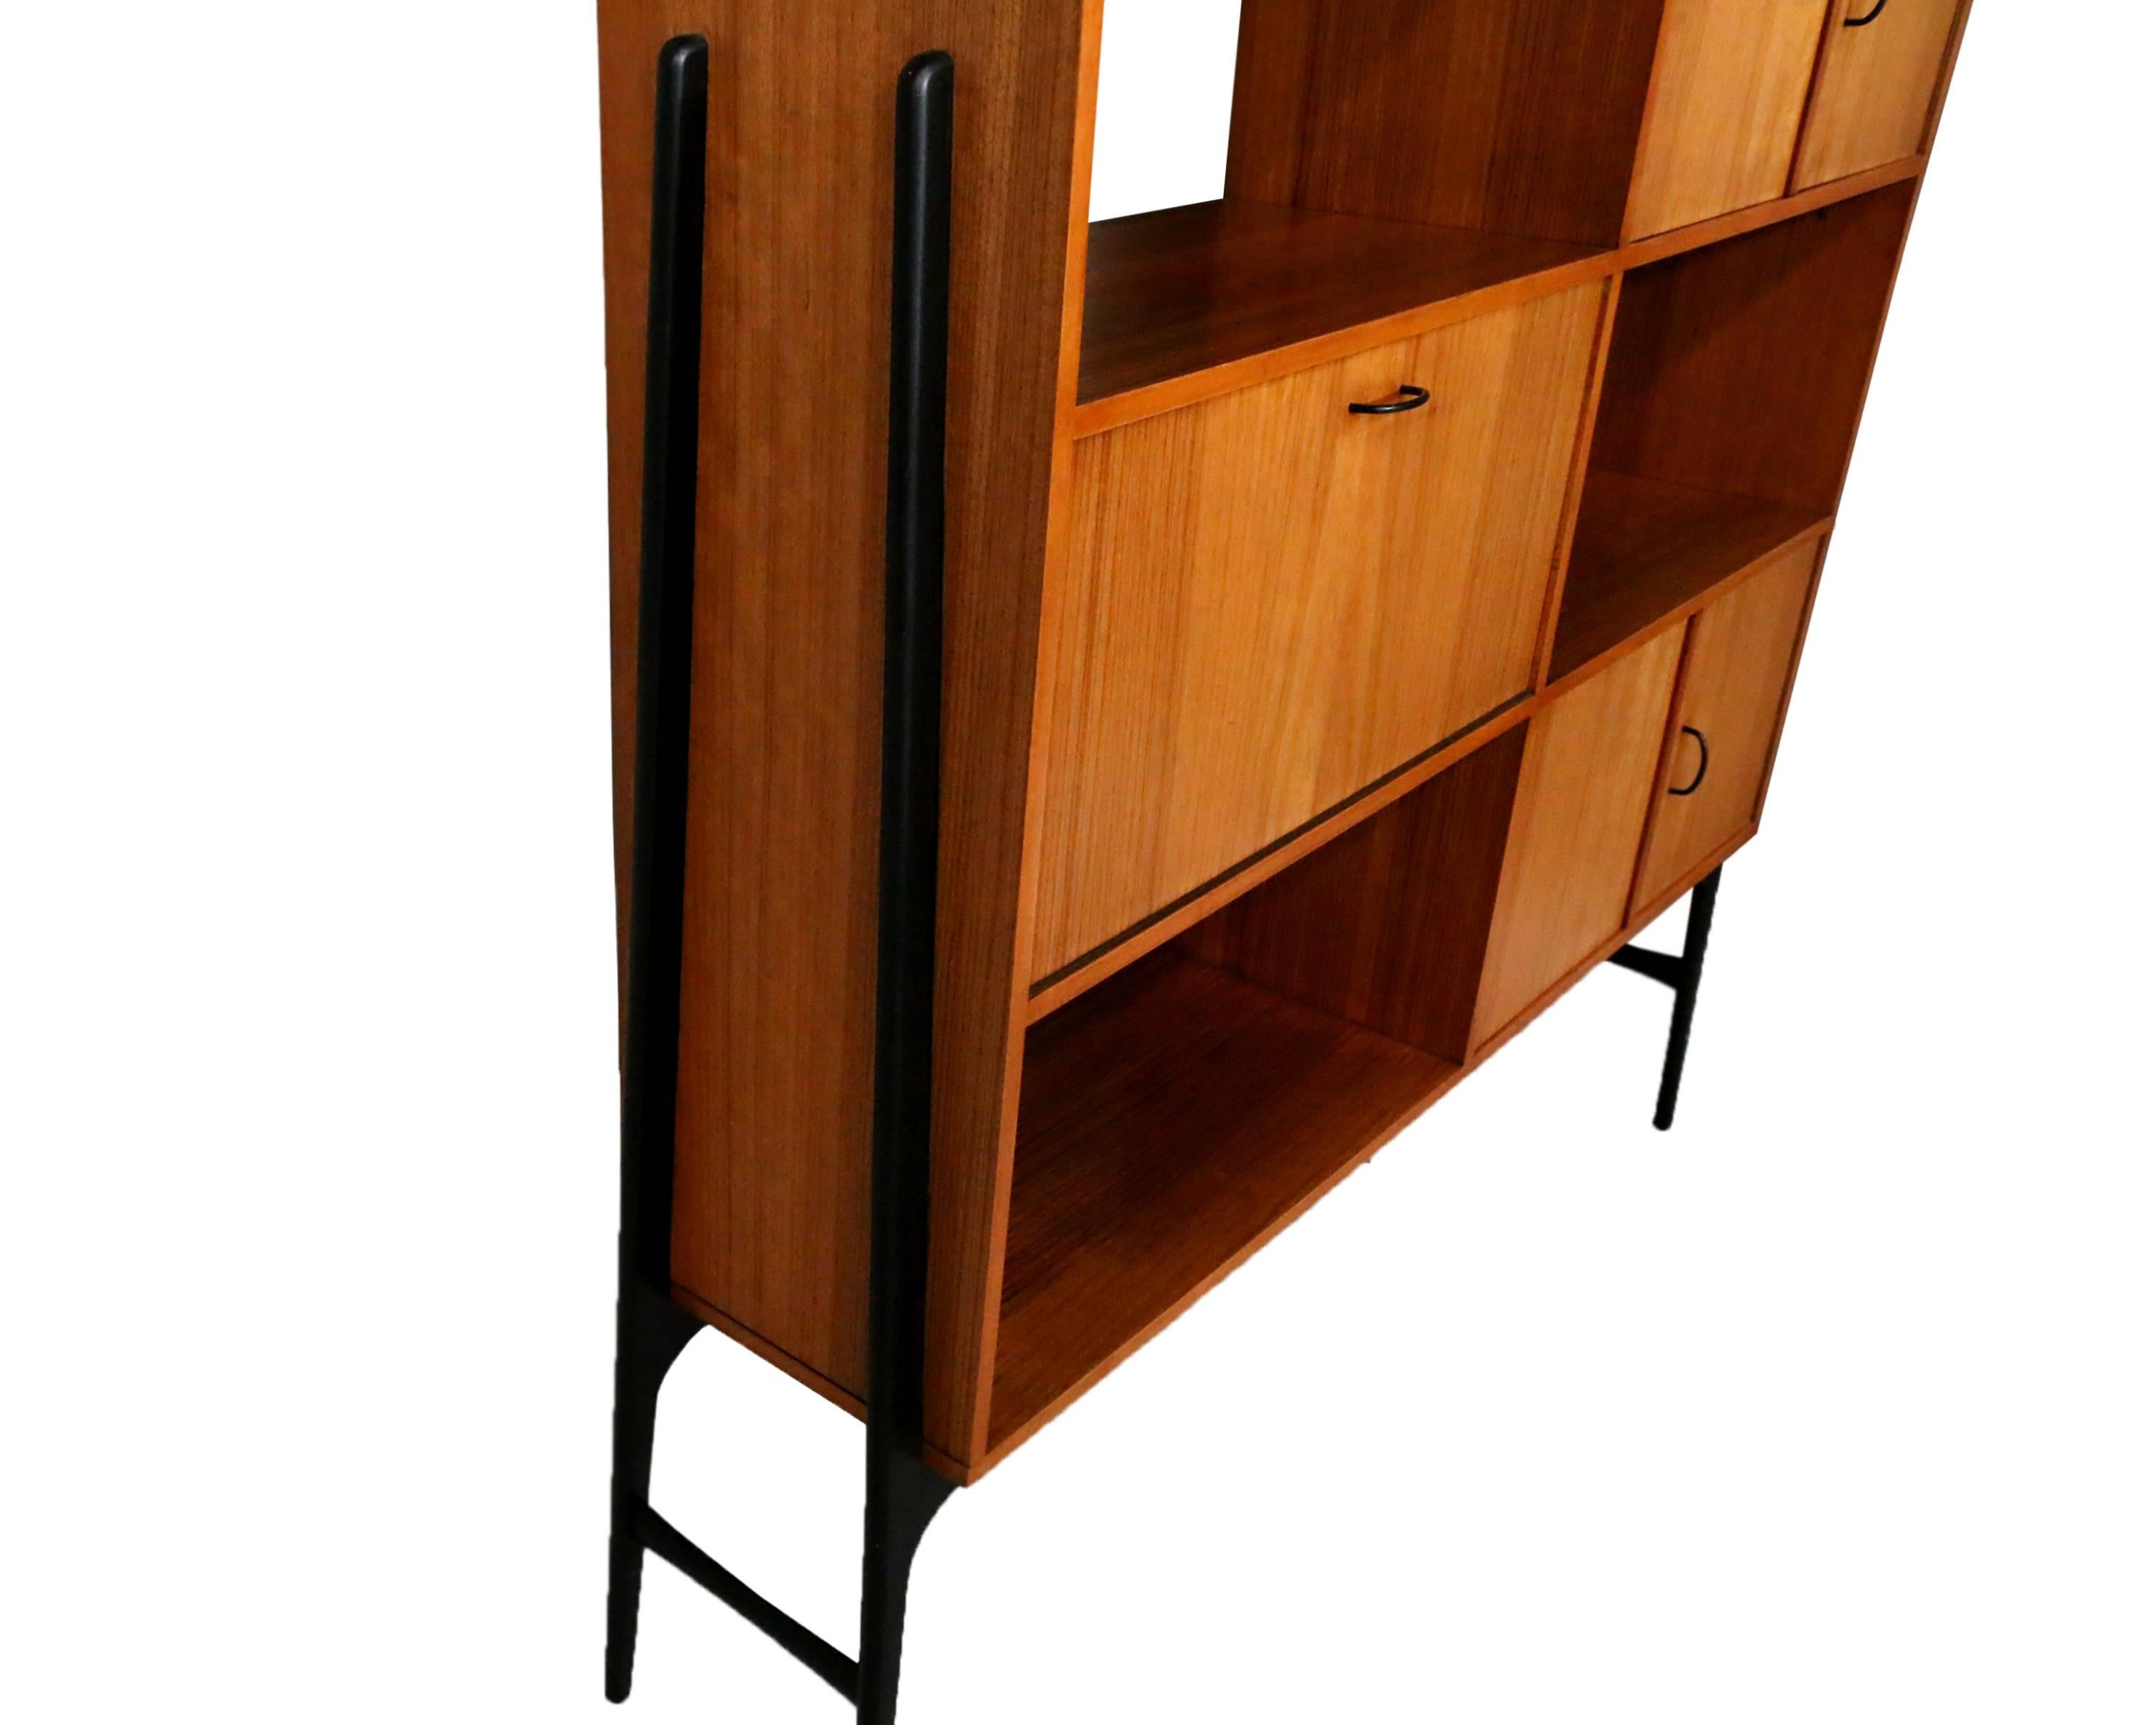 20th Century Rare Modernist Highboard by Belgian Architect and Designer Alfred Hendrickx